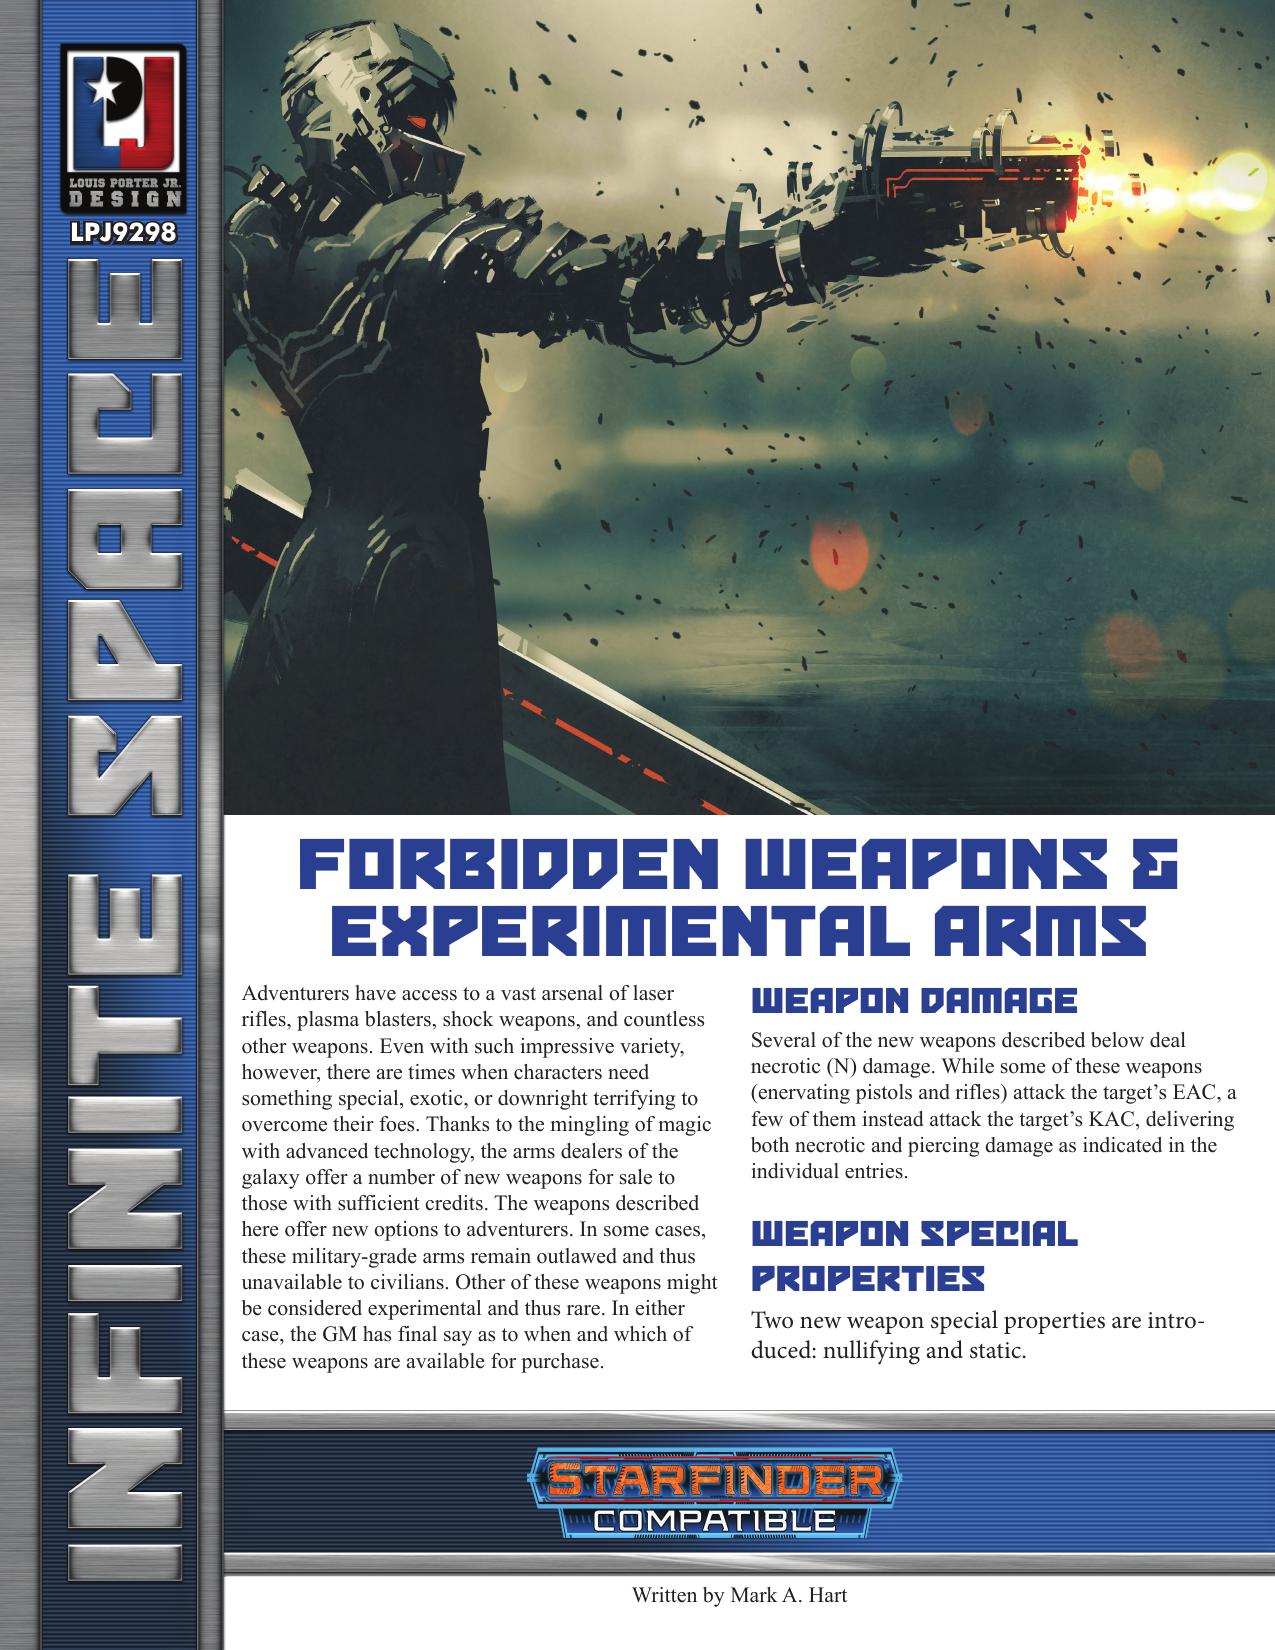 Forbidden Weapons Experimental Arms